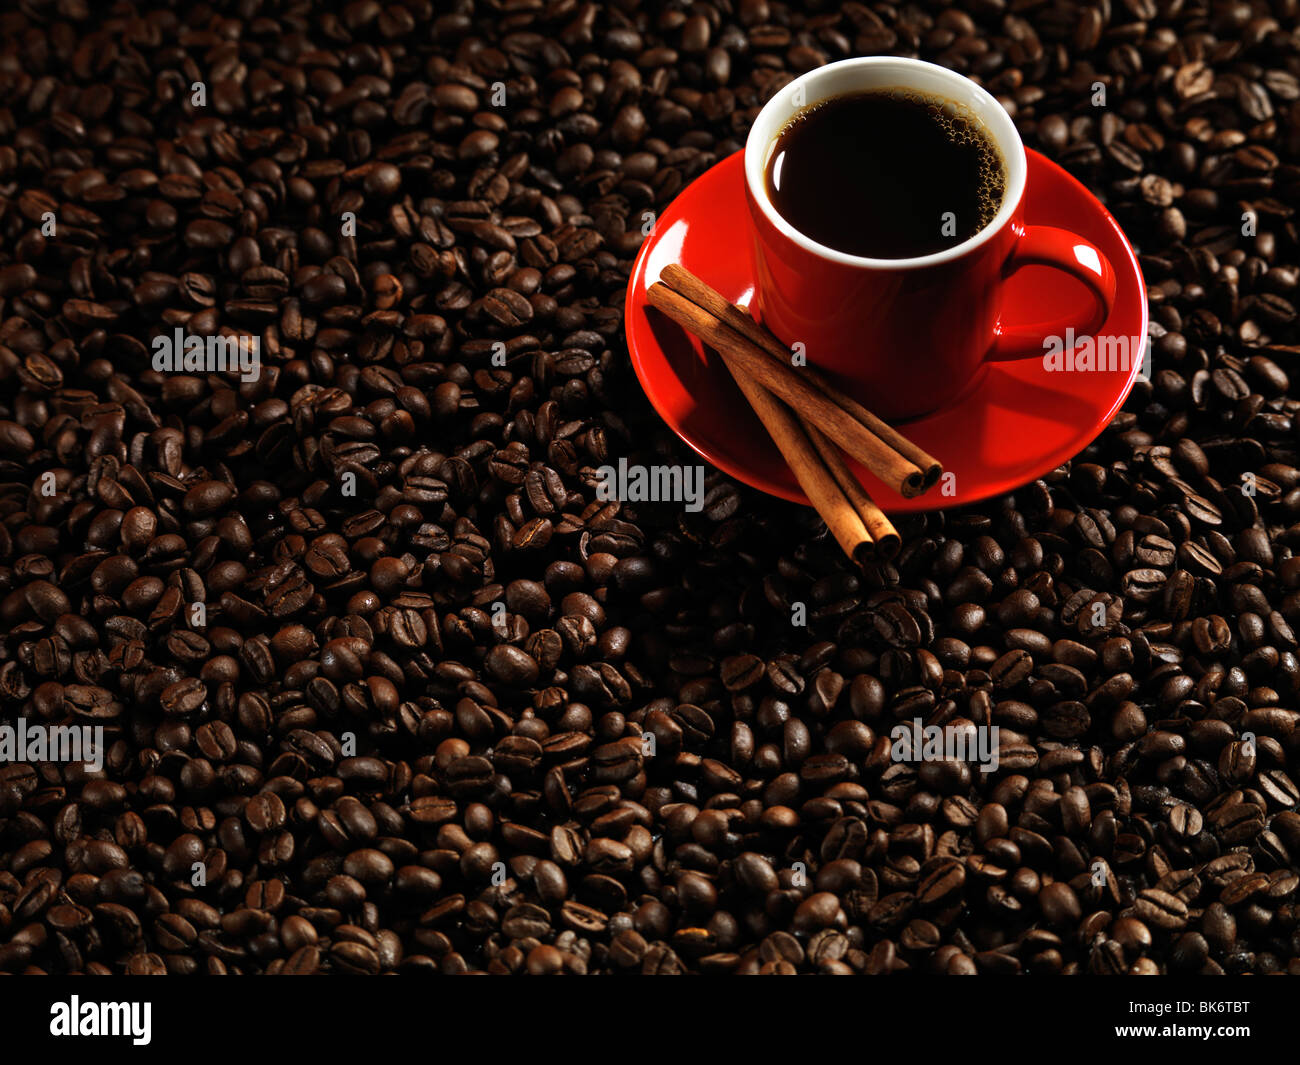 Red cup of coffee on coffe beans background Stock Photo